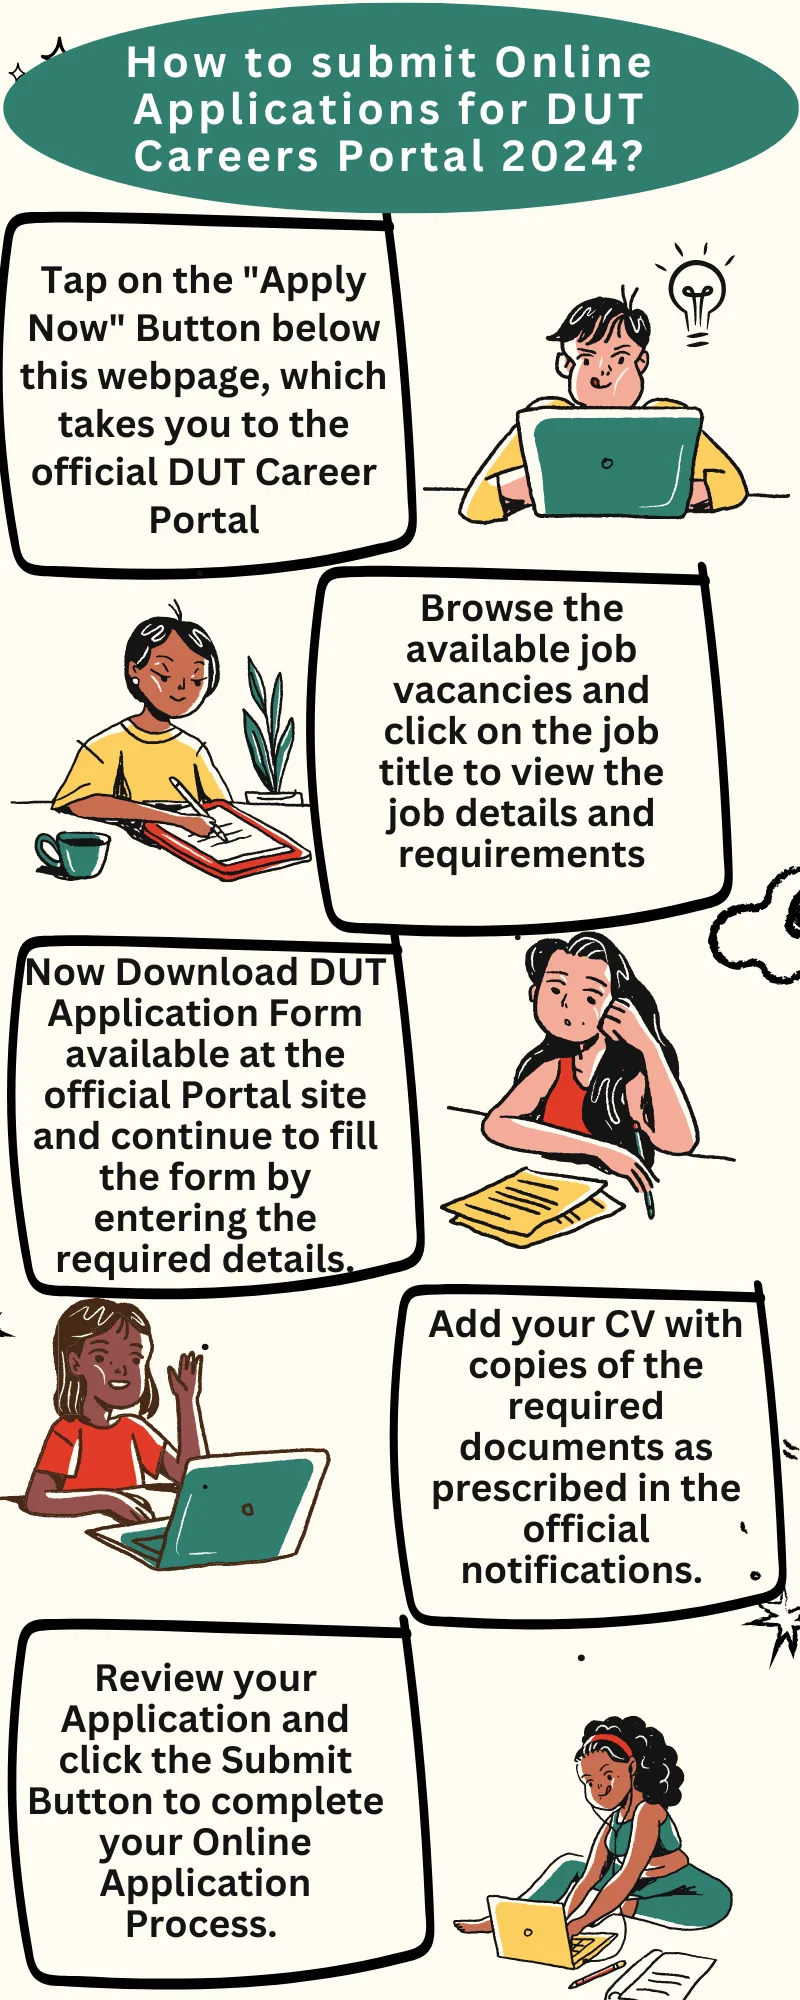 How to submit Online Applications for DUT Careers Portal 2024